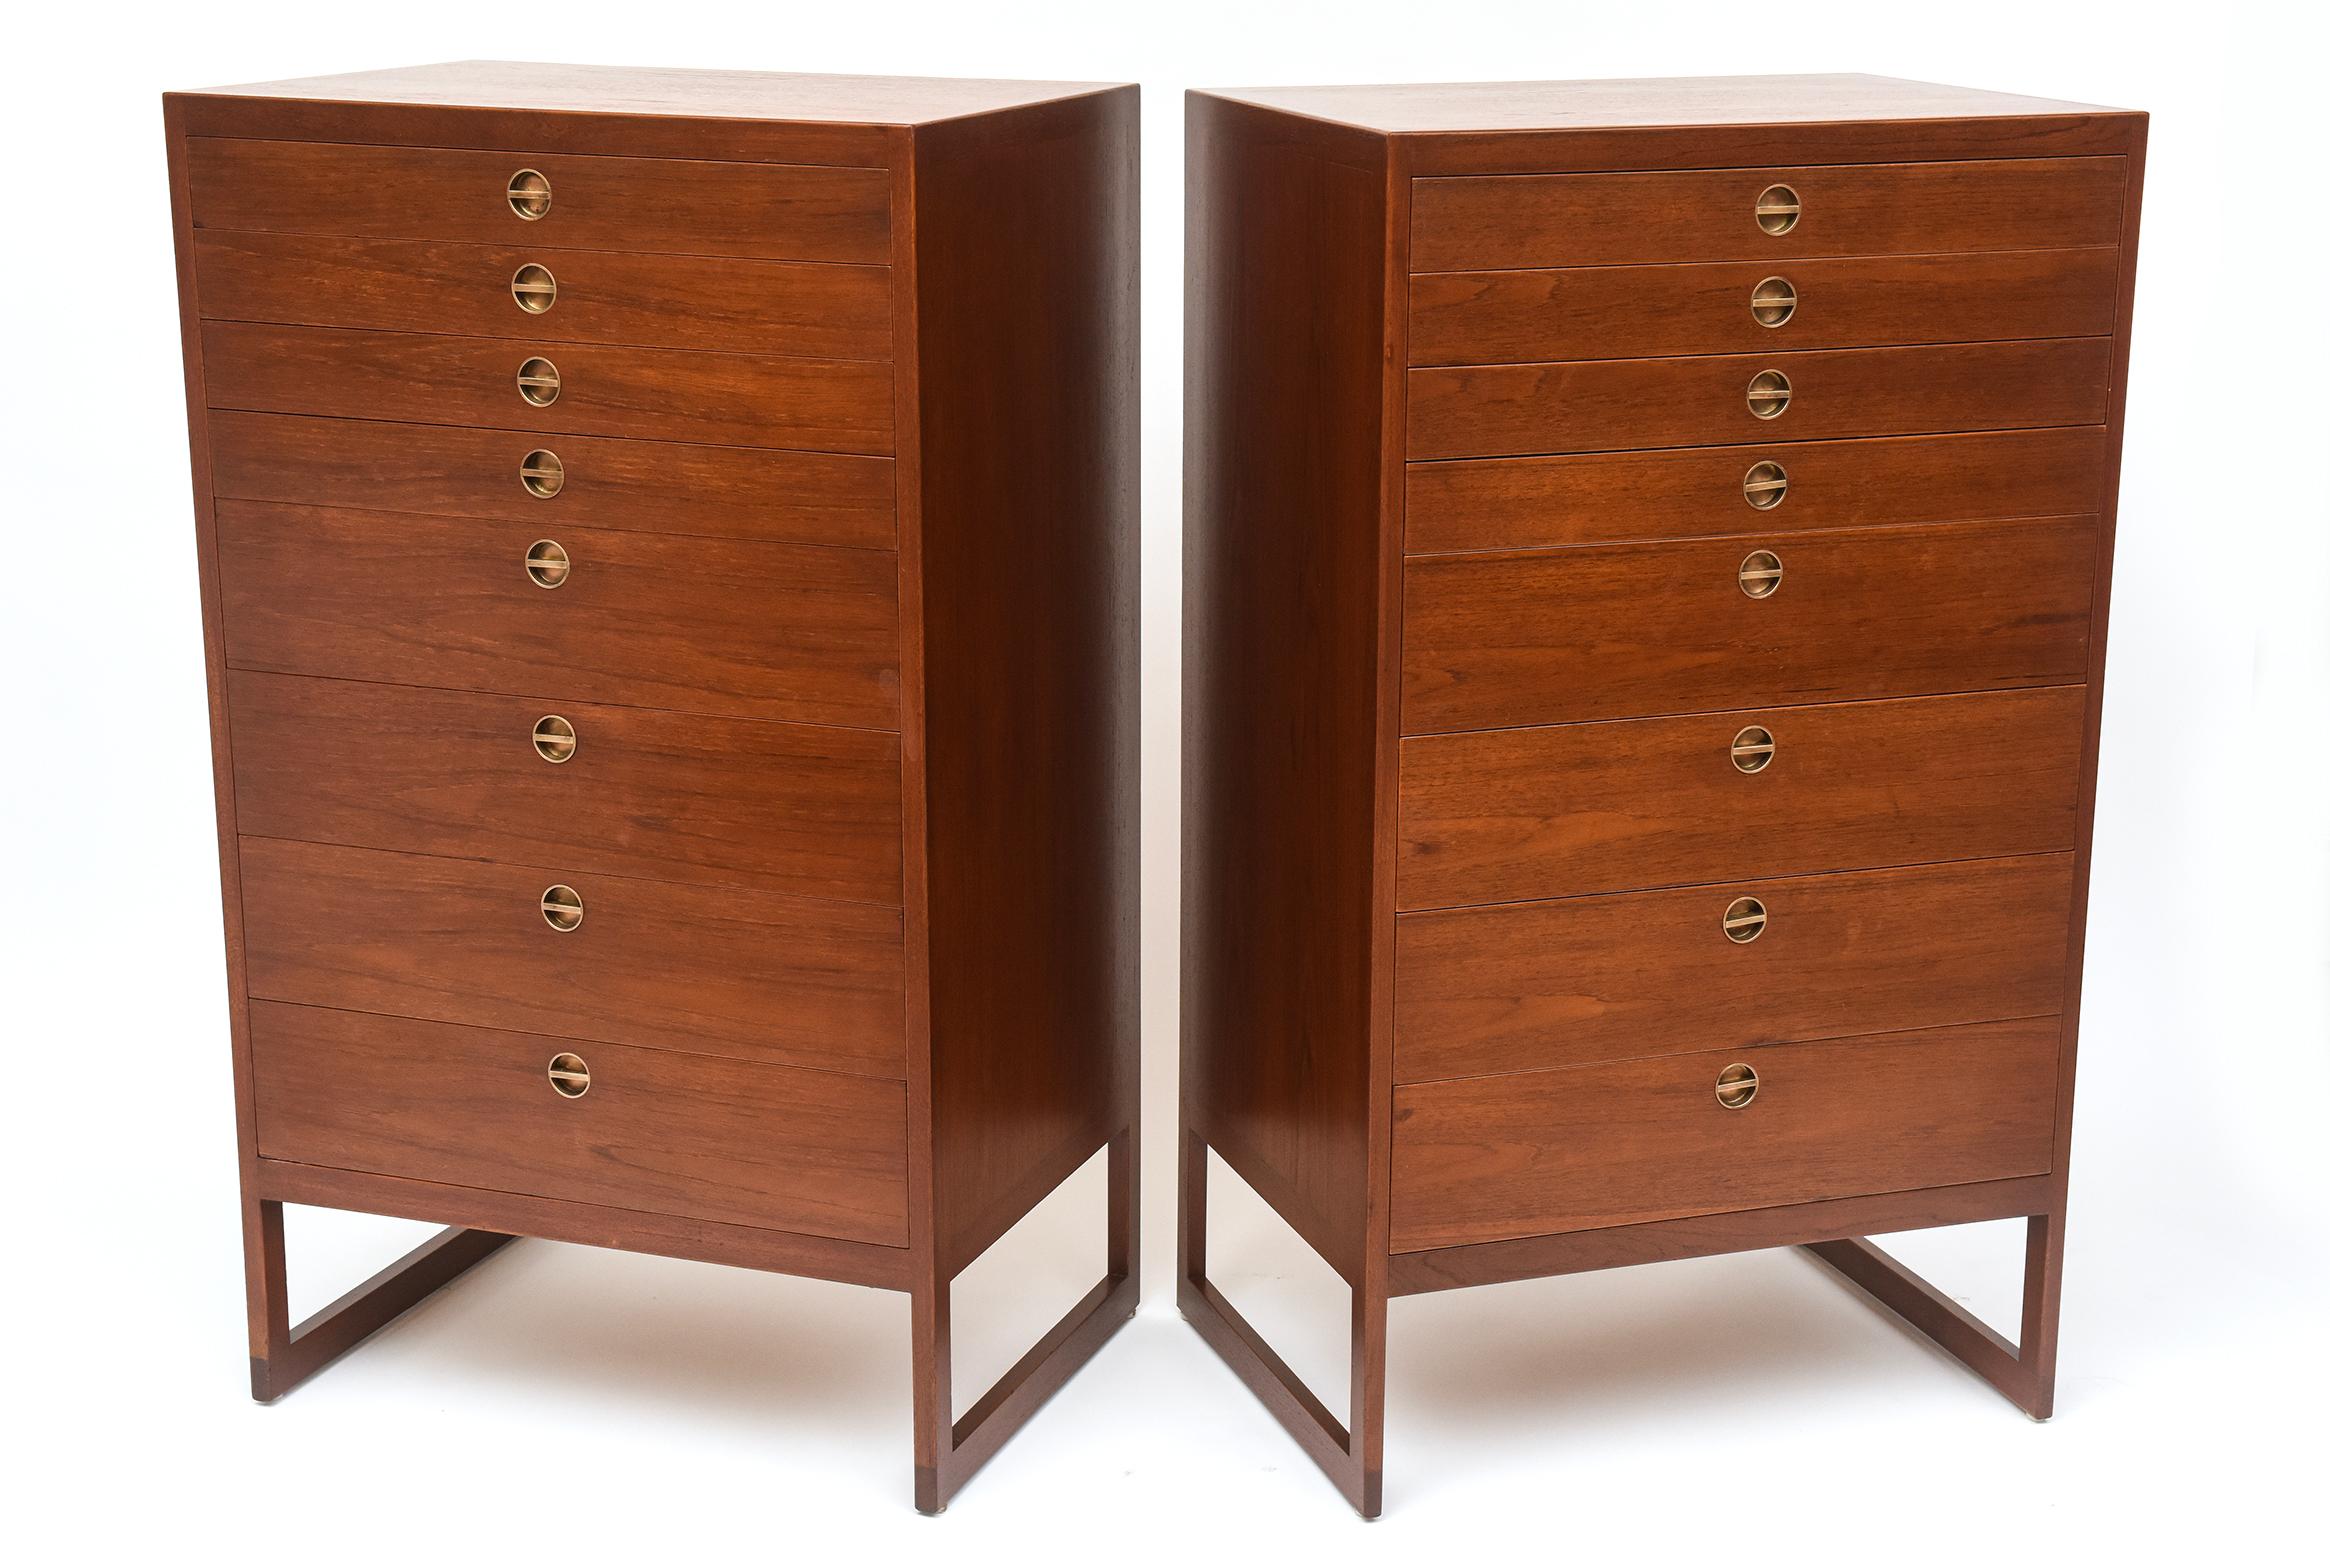 Desirable teak tallboy chests with inset brass handles, designed by Børge Mogensen (Model Bm-64) in 1957 and manufactured by cabinetmaker P. Lauritsen, in Denmark, circa 1960. Four narrow drawers stack over four wide drawers (all in solid combed